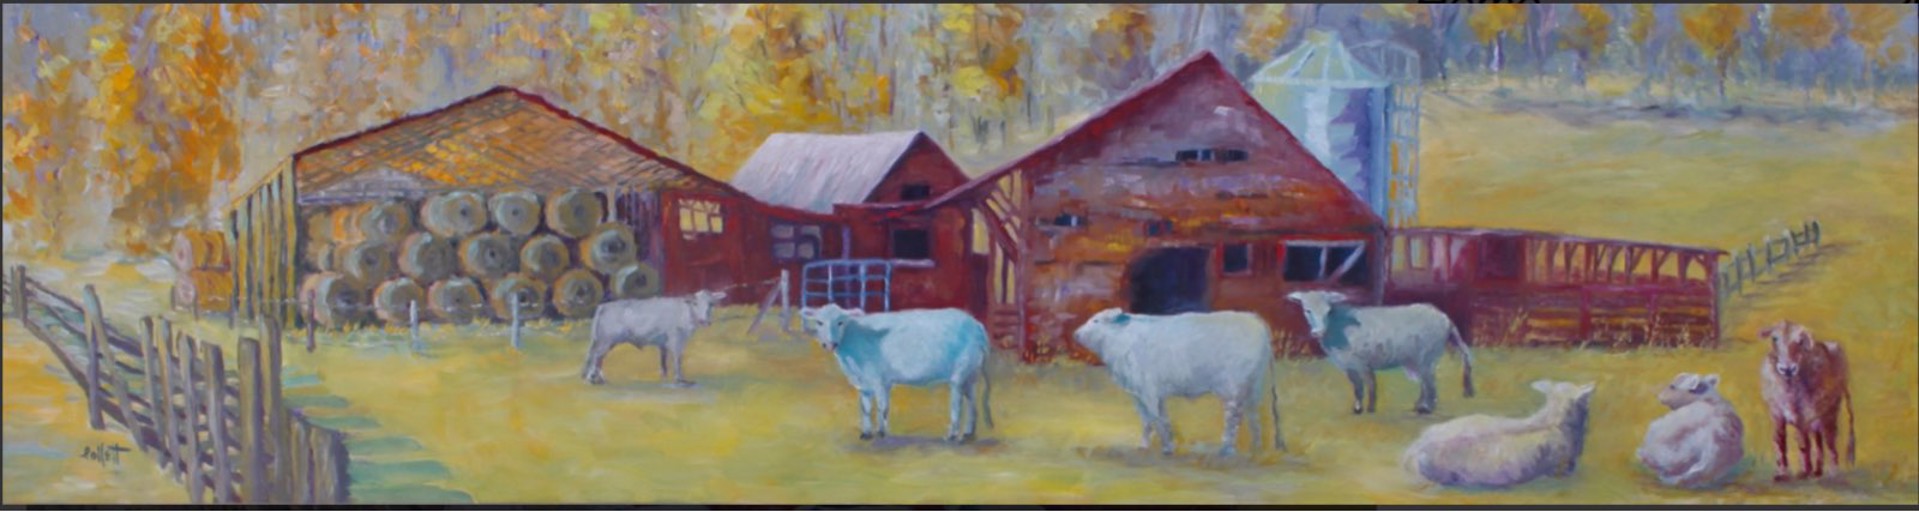 The Cows Came Home by Cynthia Pollett